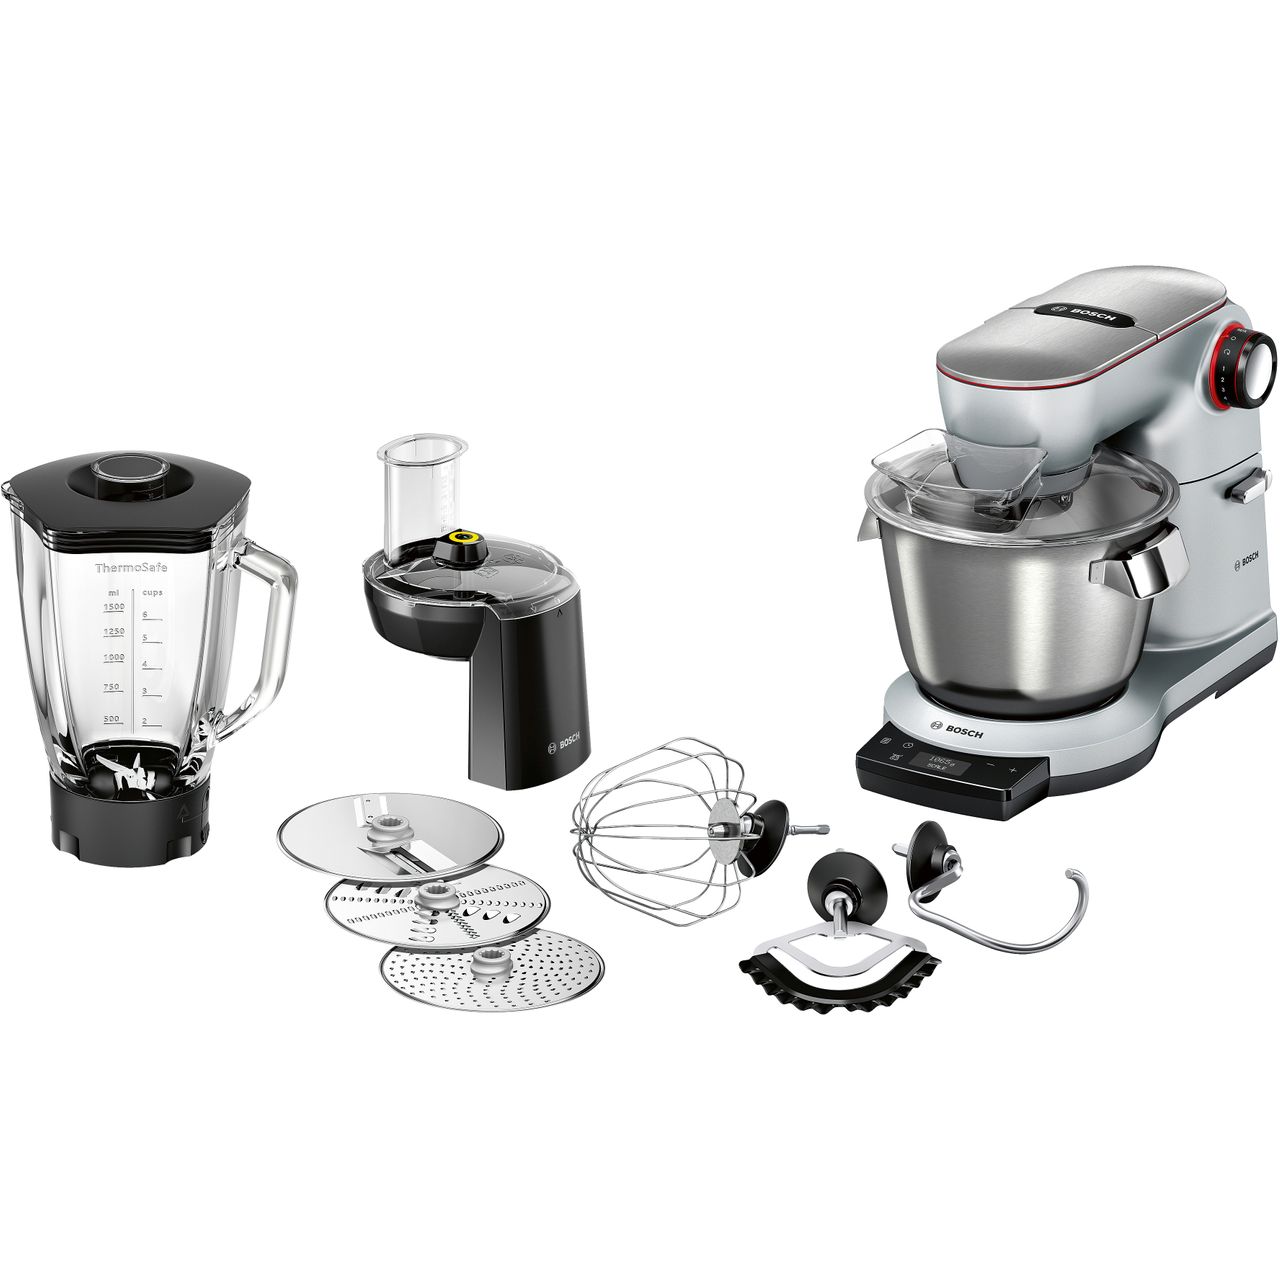 Bosch OptiMUM MUM9GX5S21 Stand Mixer with 5.5 Litre Bowl Review